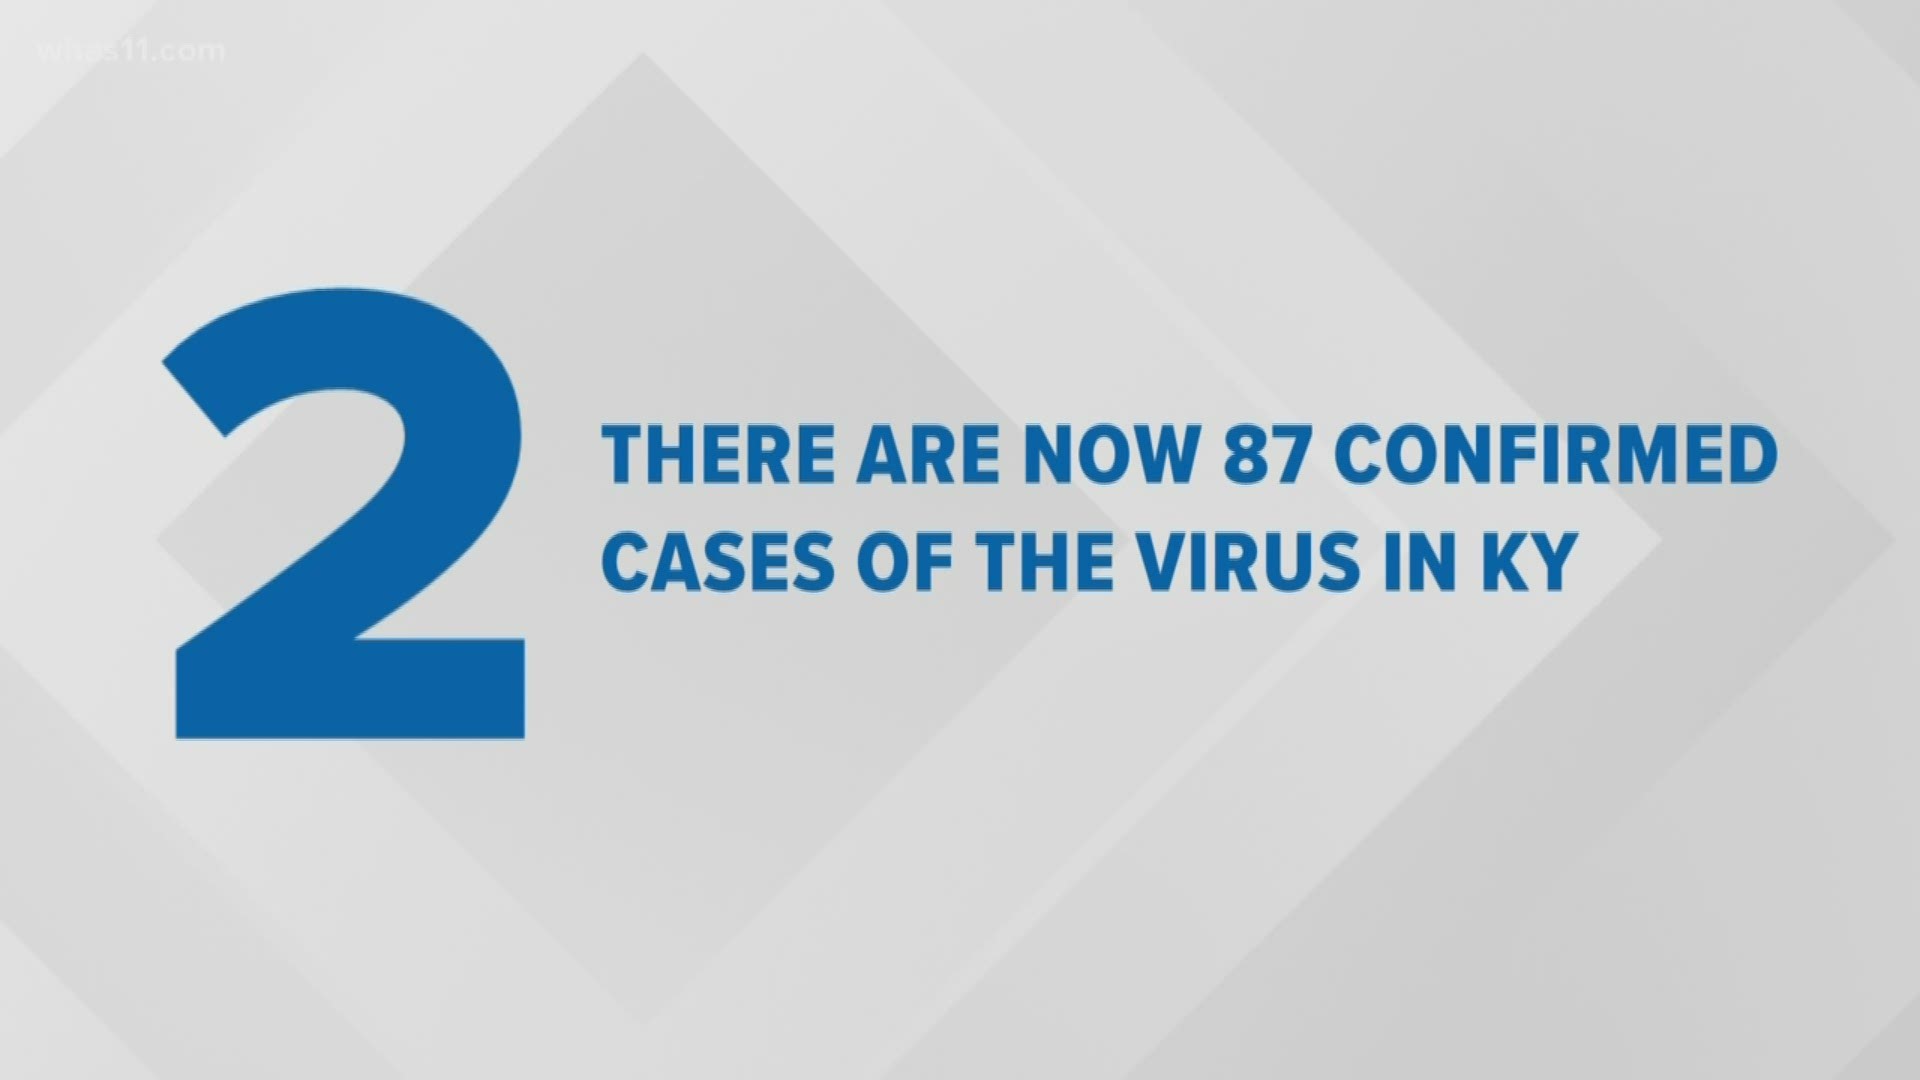 Governor Andy Beshear says an Anderson County man is the latest victim of the coronavirus. Eighty-seven confirmed cases are in Kentucky.